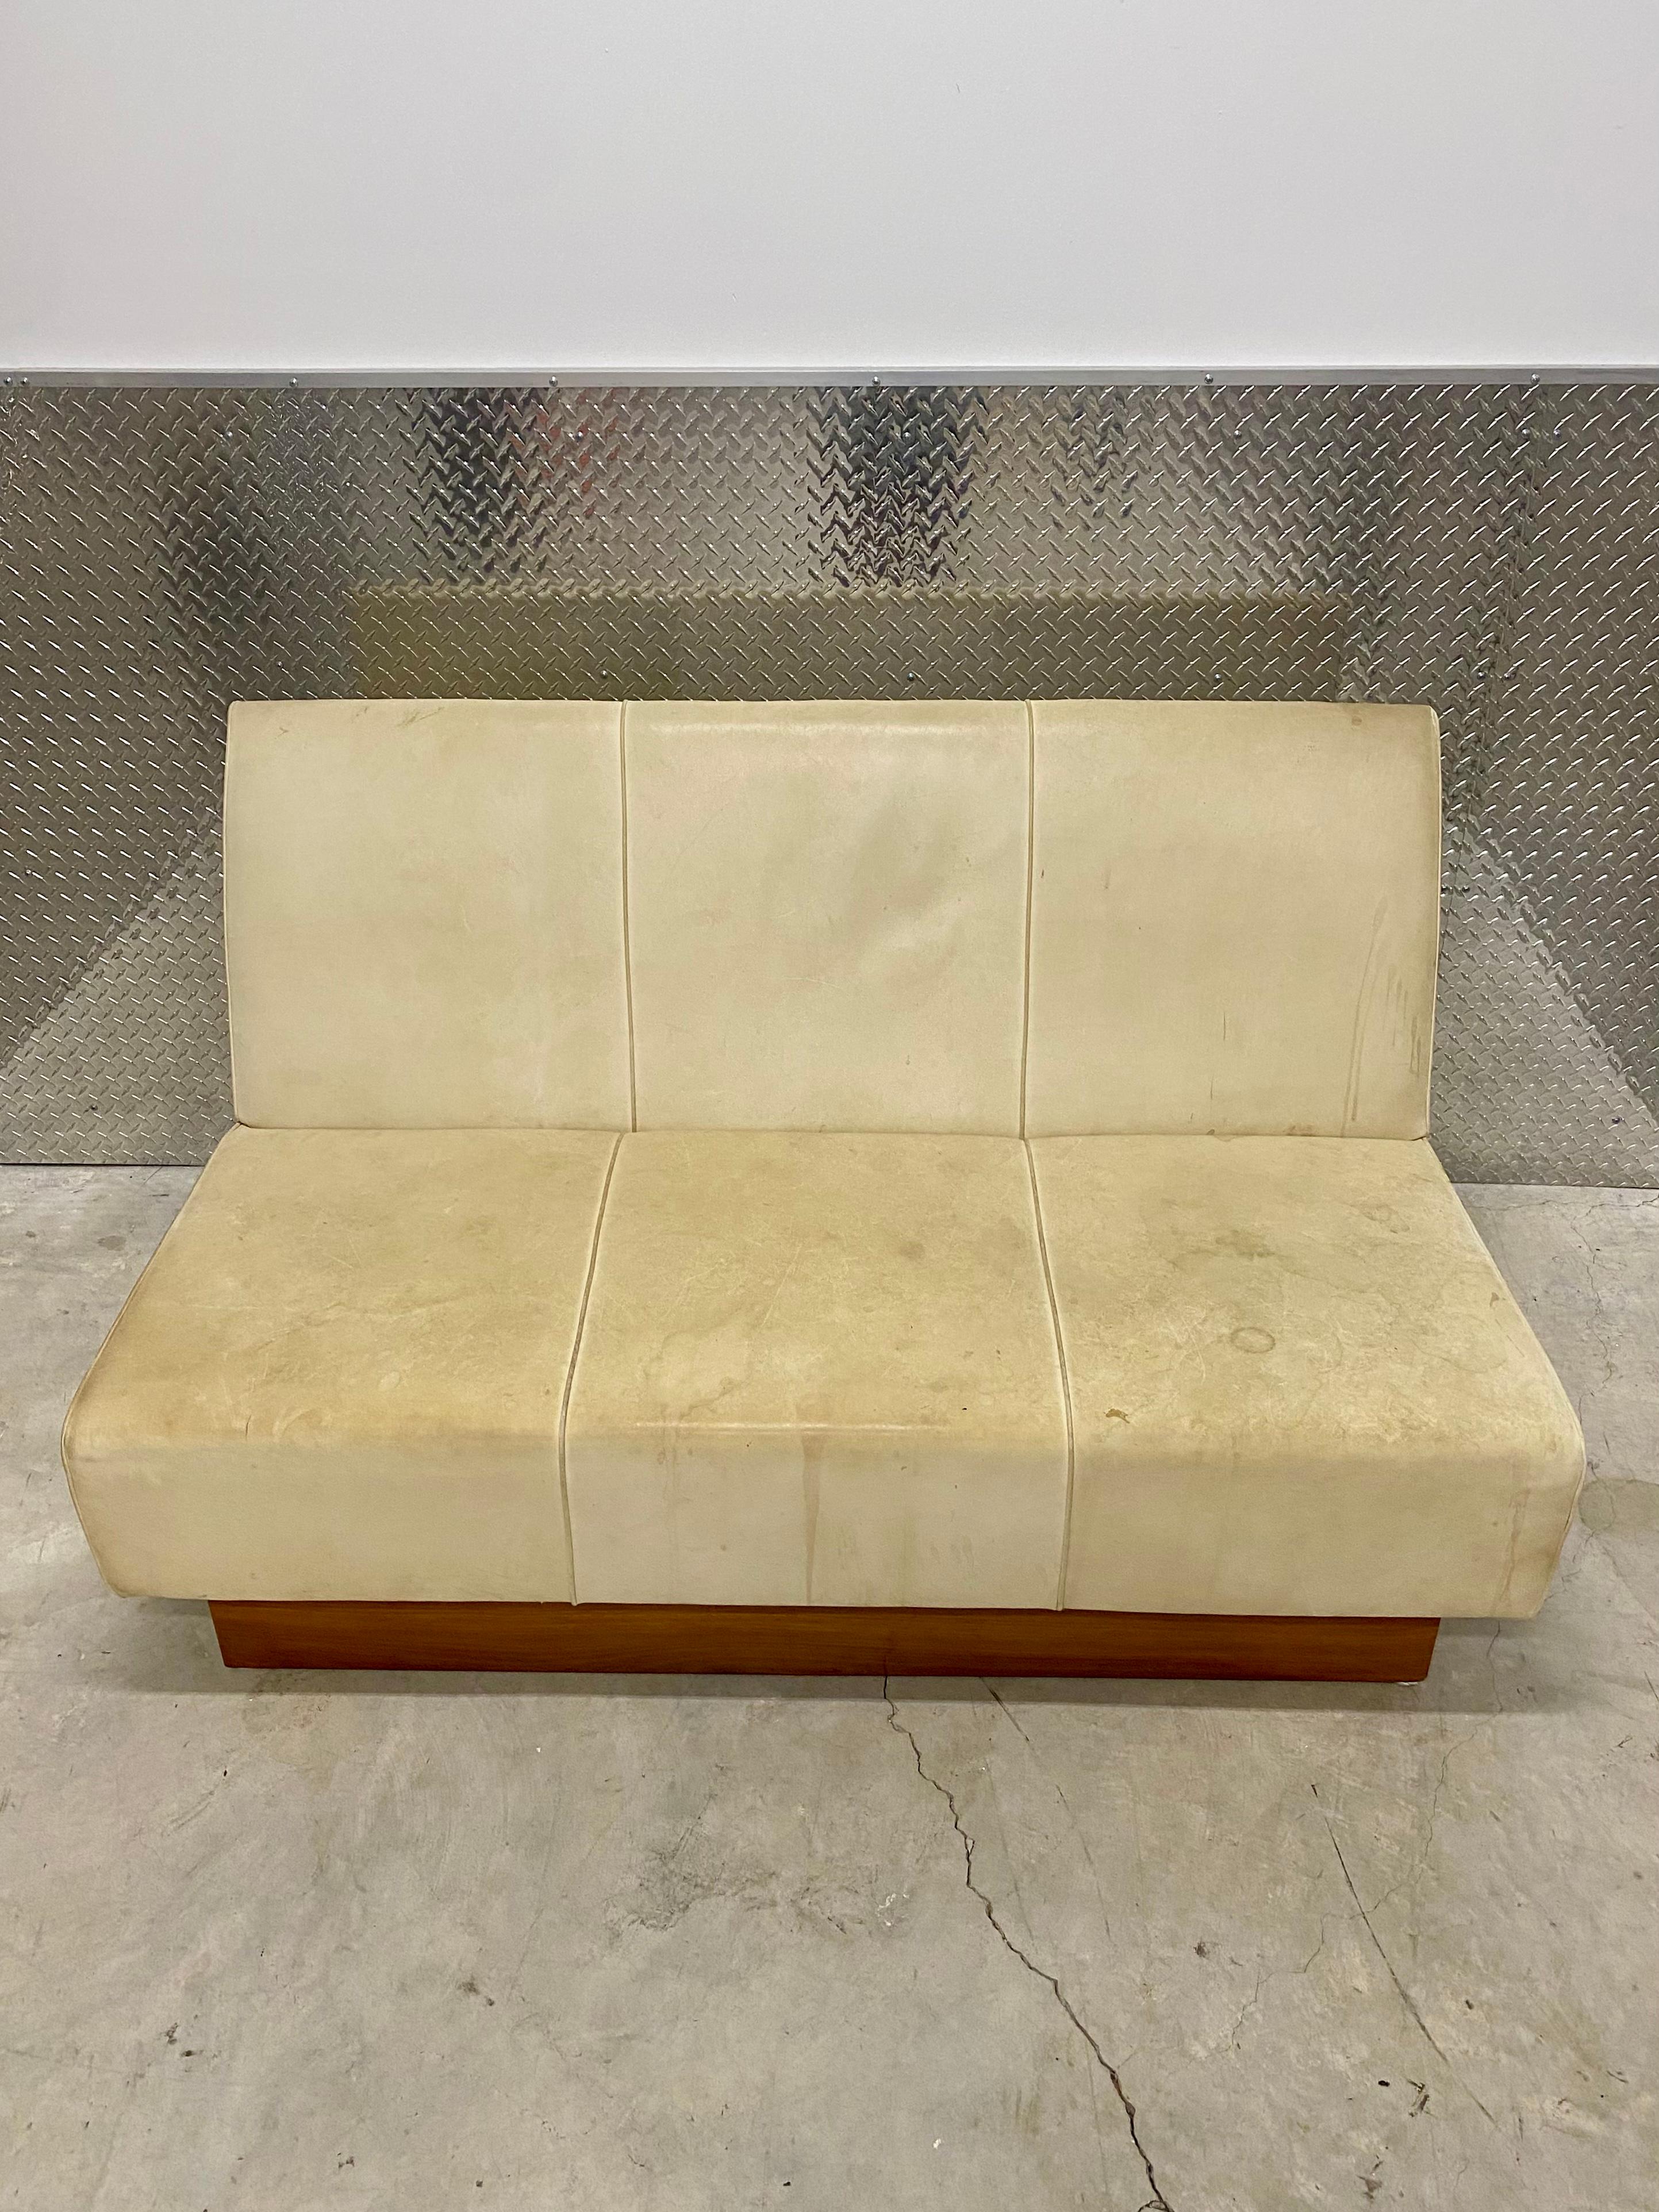 1960s Milo Baughman Leather Plinth Floating Sofa and Chairs, Set of 3 For Sale 5